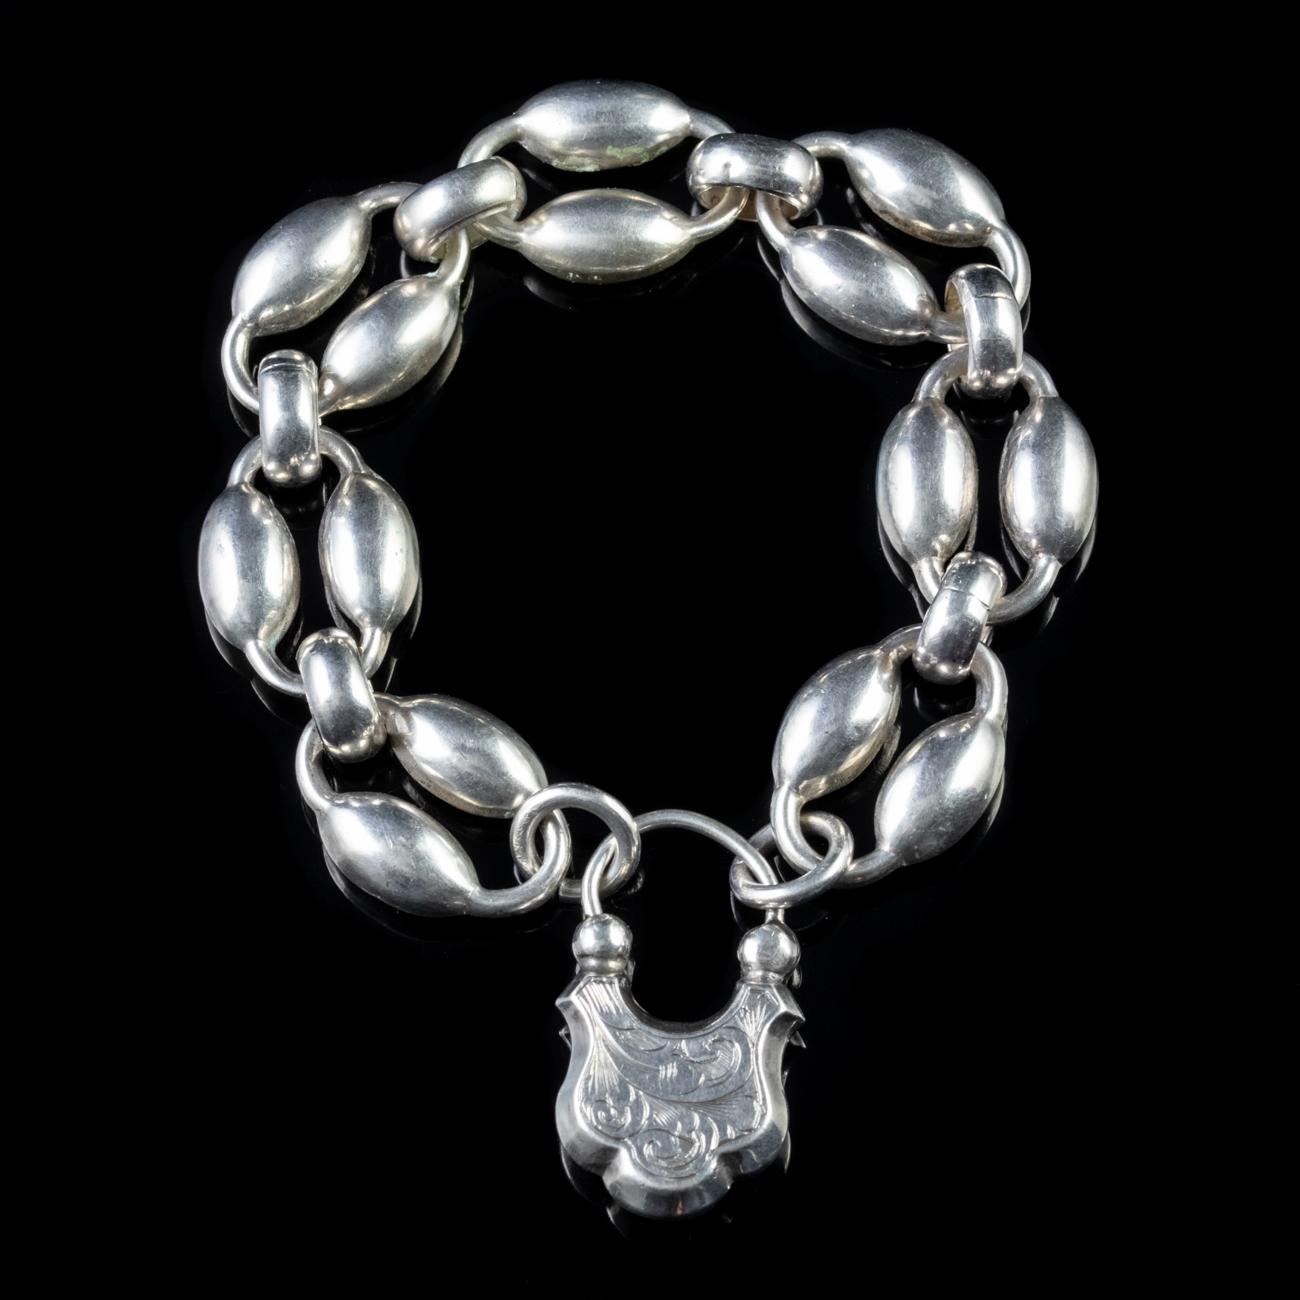 This beautiful Antique Victorian bracelet has been modelled in Silver and features large links with a bubble style design to them. 

To close the bracelet it features a large engraved clasp in the shape of a padlock which also houses a locket window